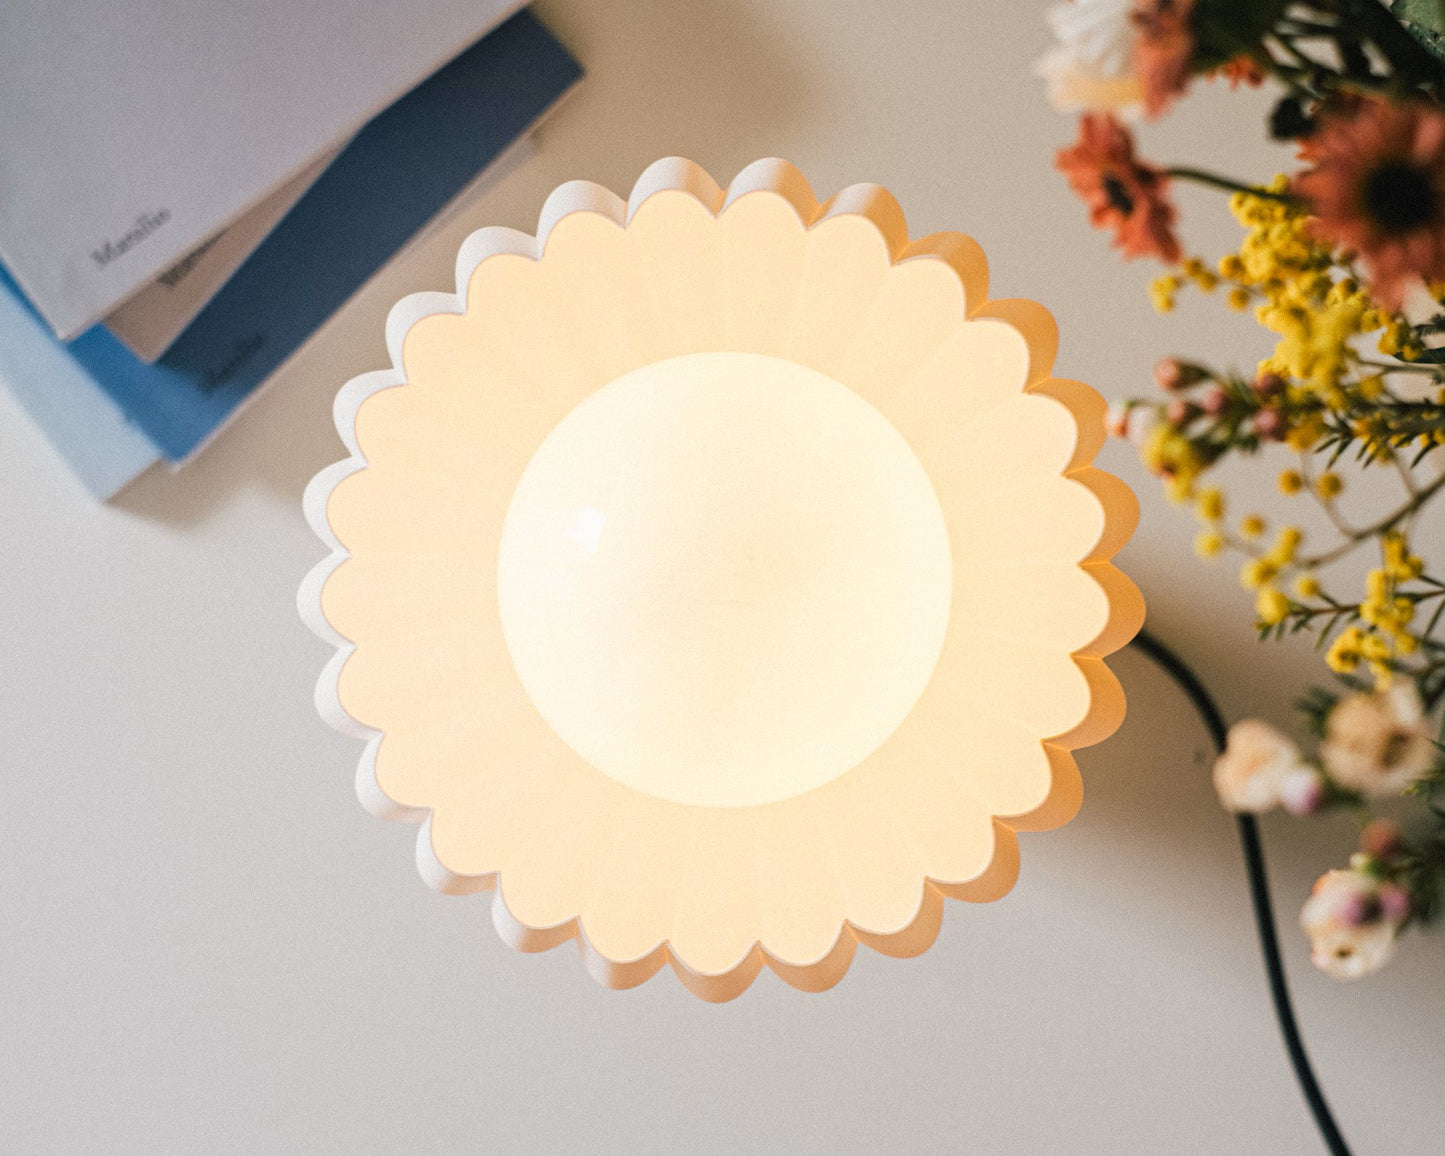 Lampe à poser en coquilage | Rivage